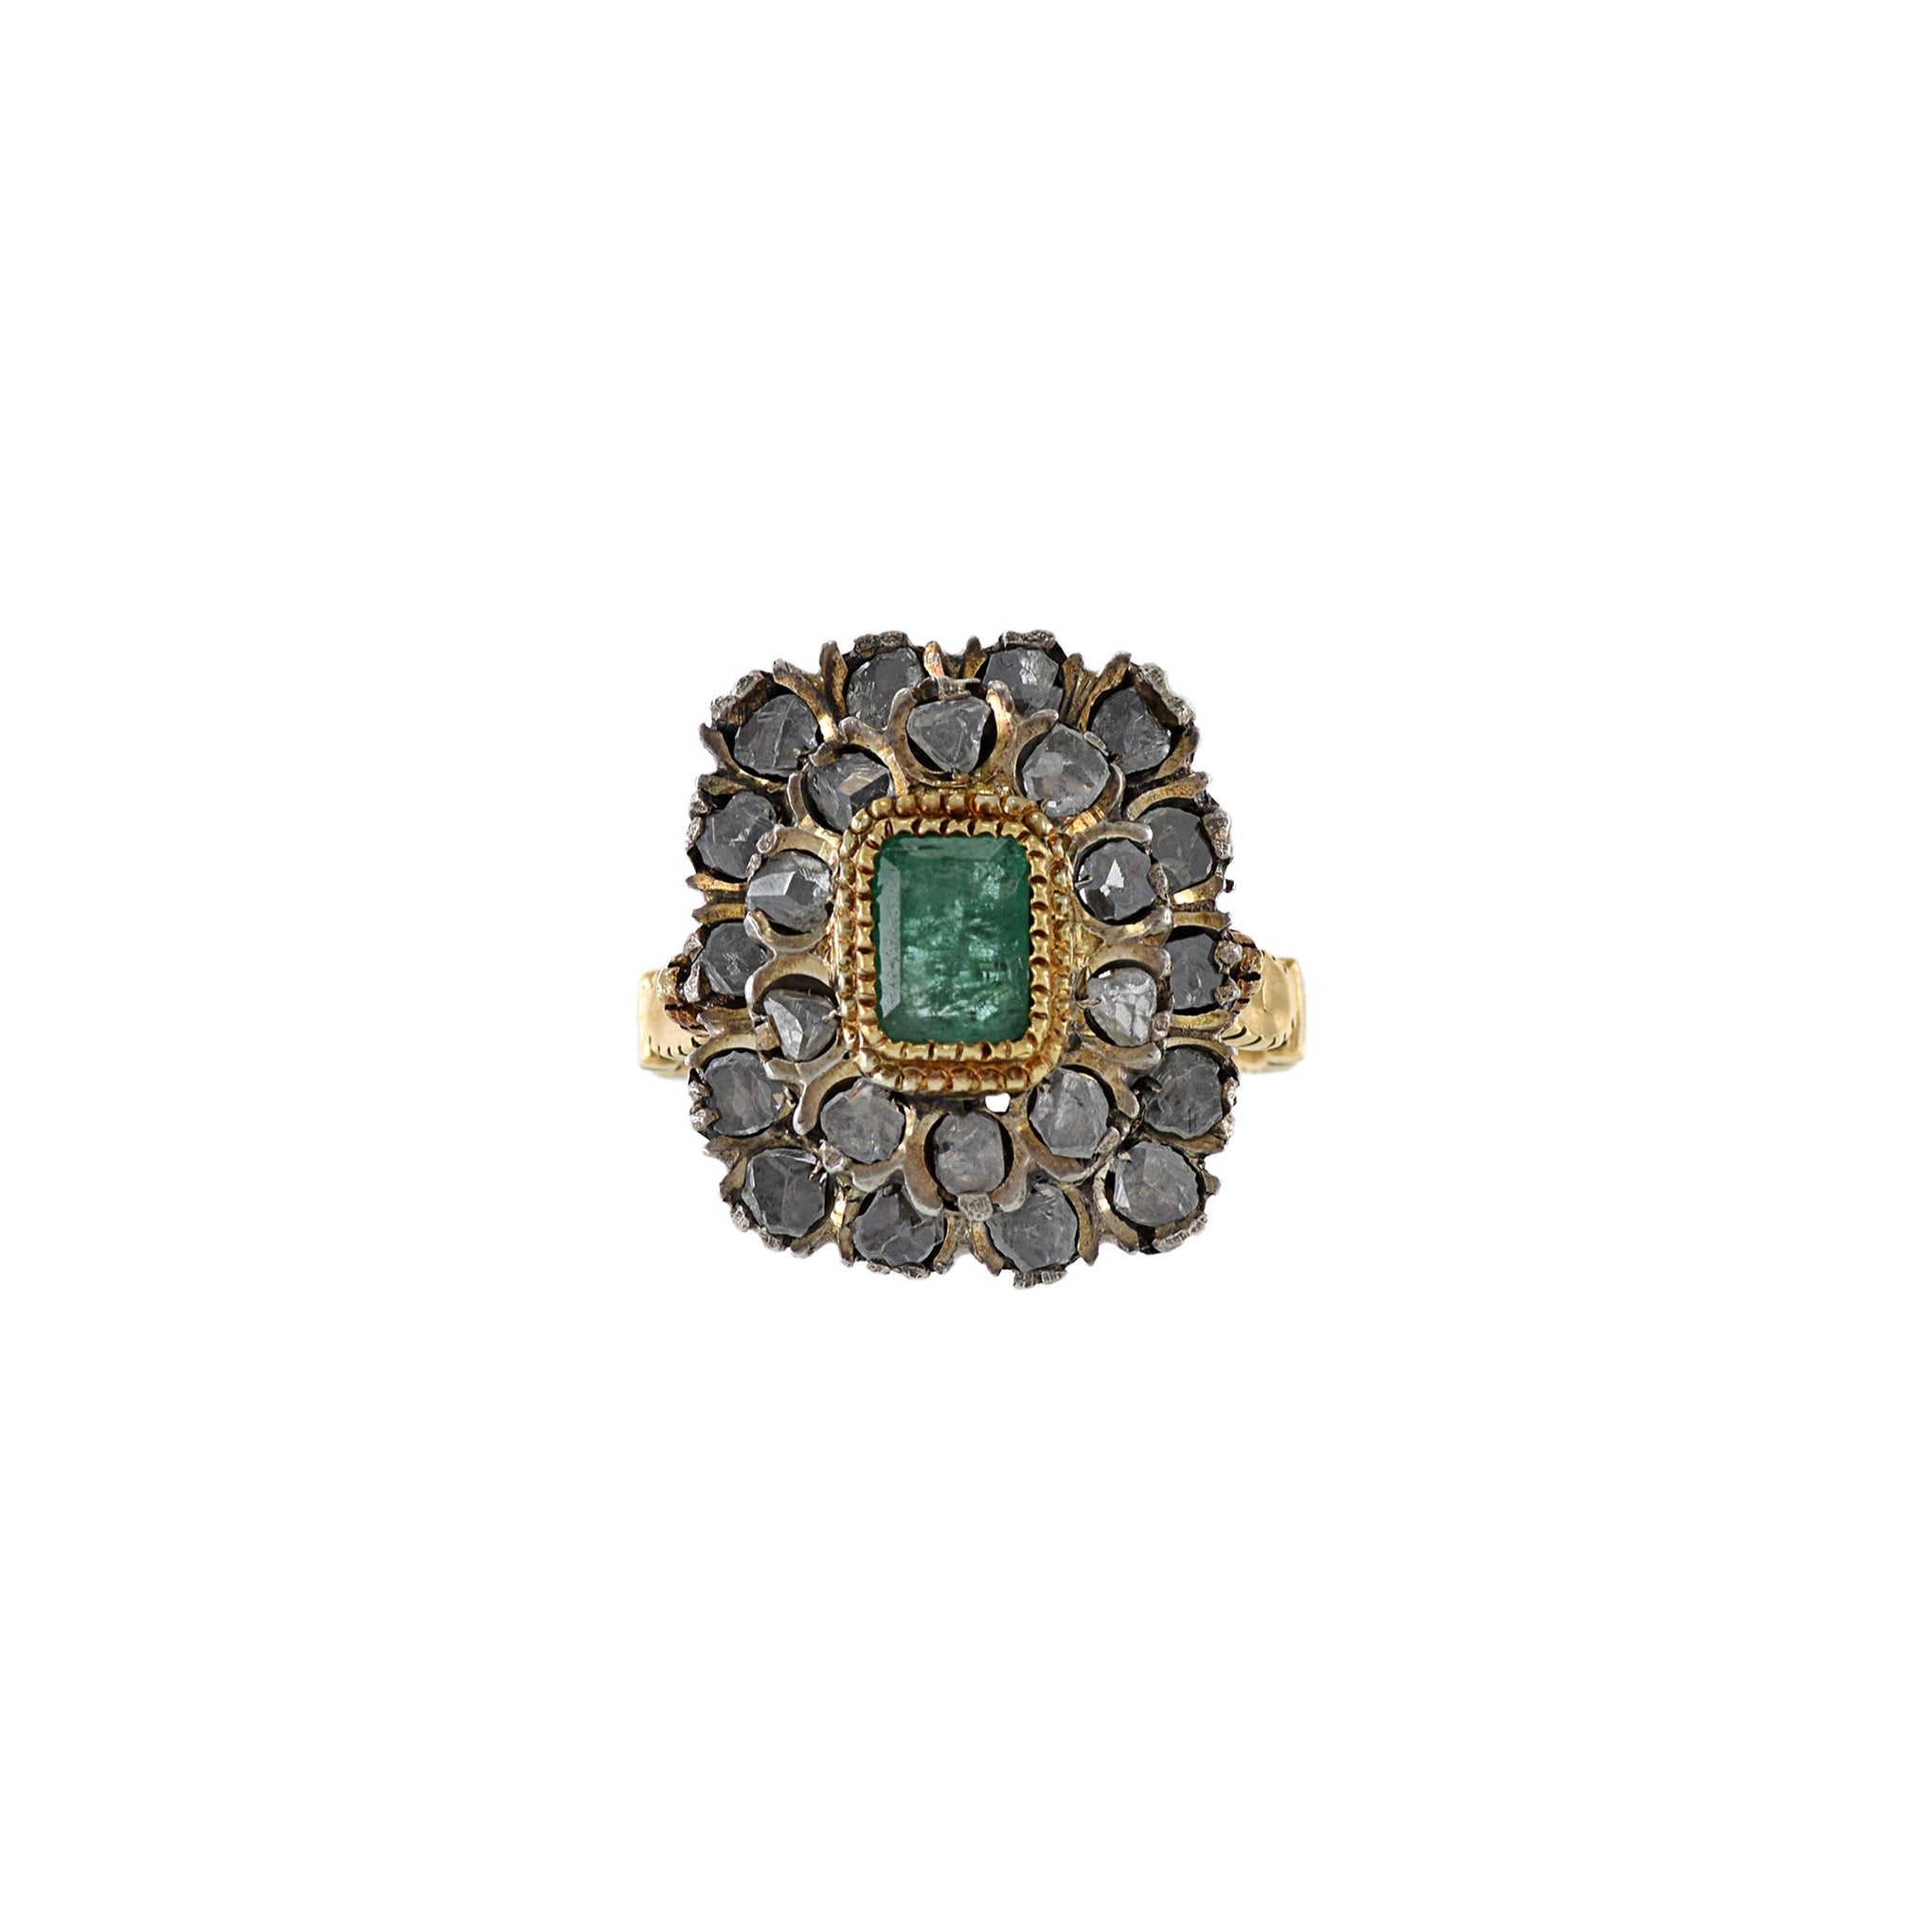 Antique Victorian Era 18KT Yellow Gold Silver Top Emerald And Diamond Ring